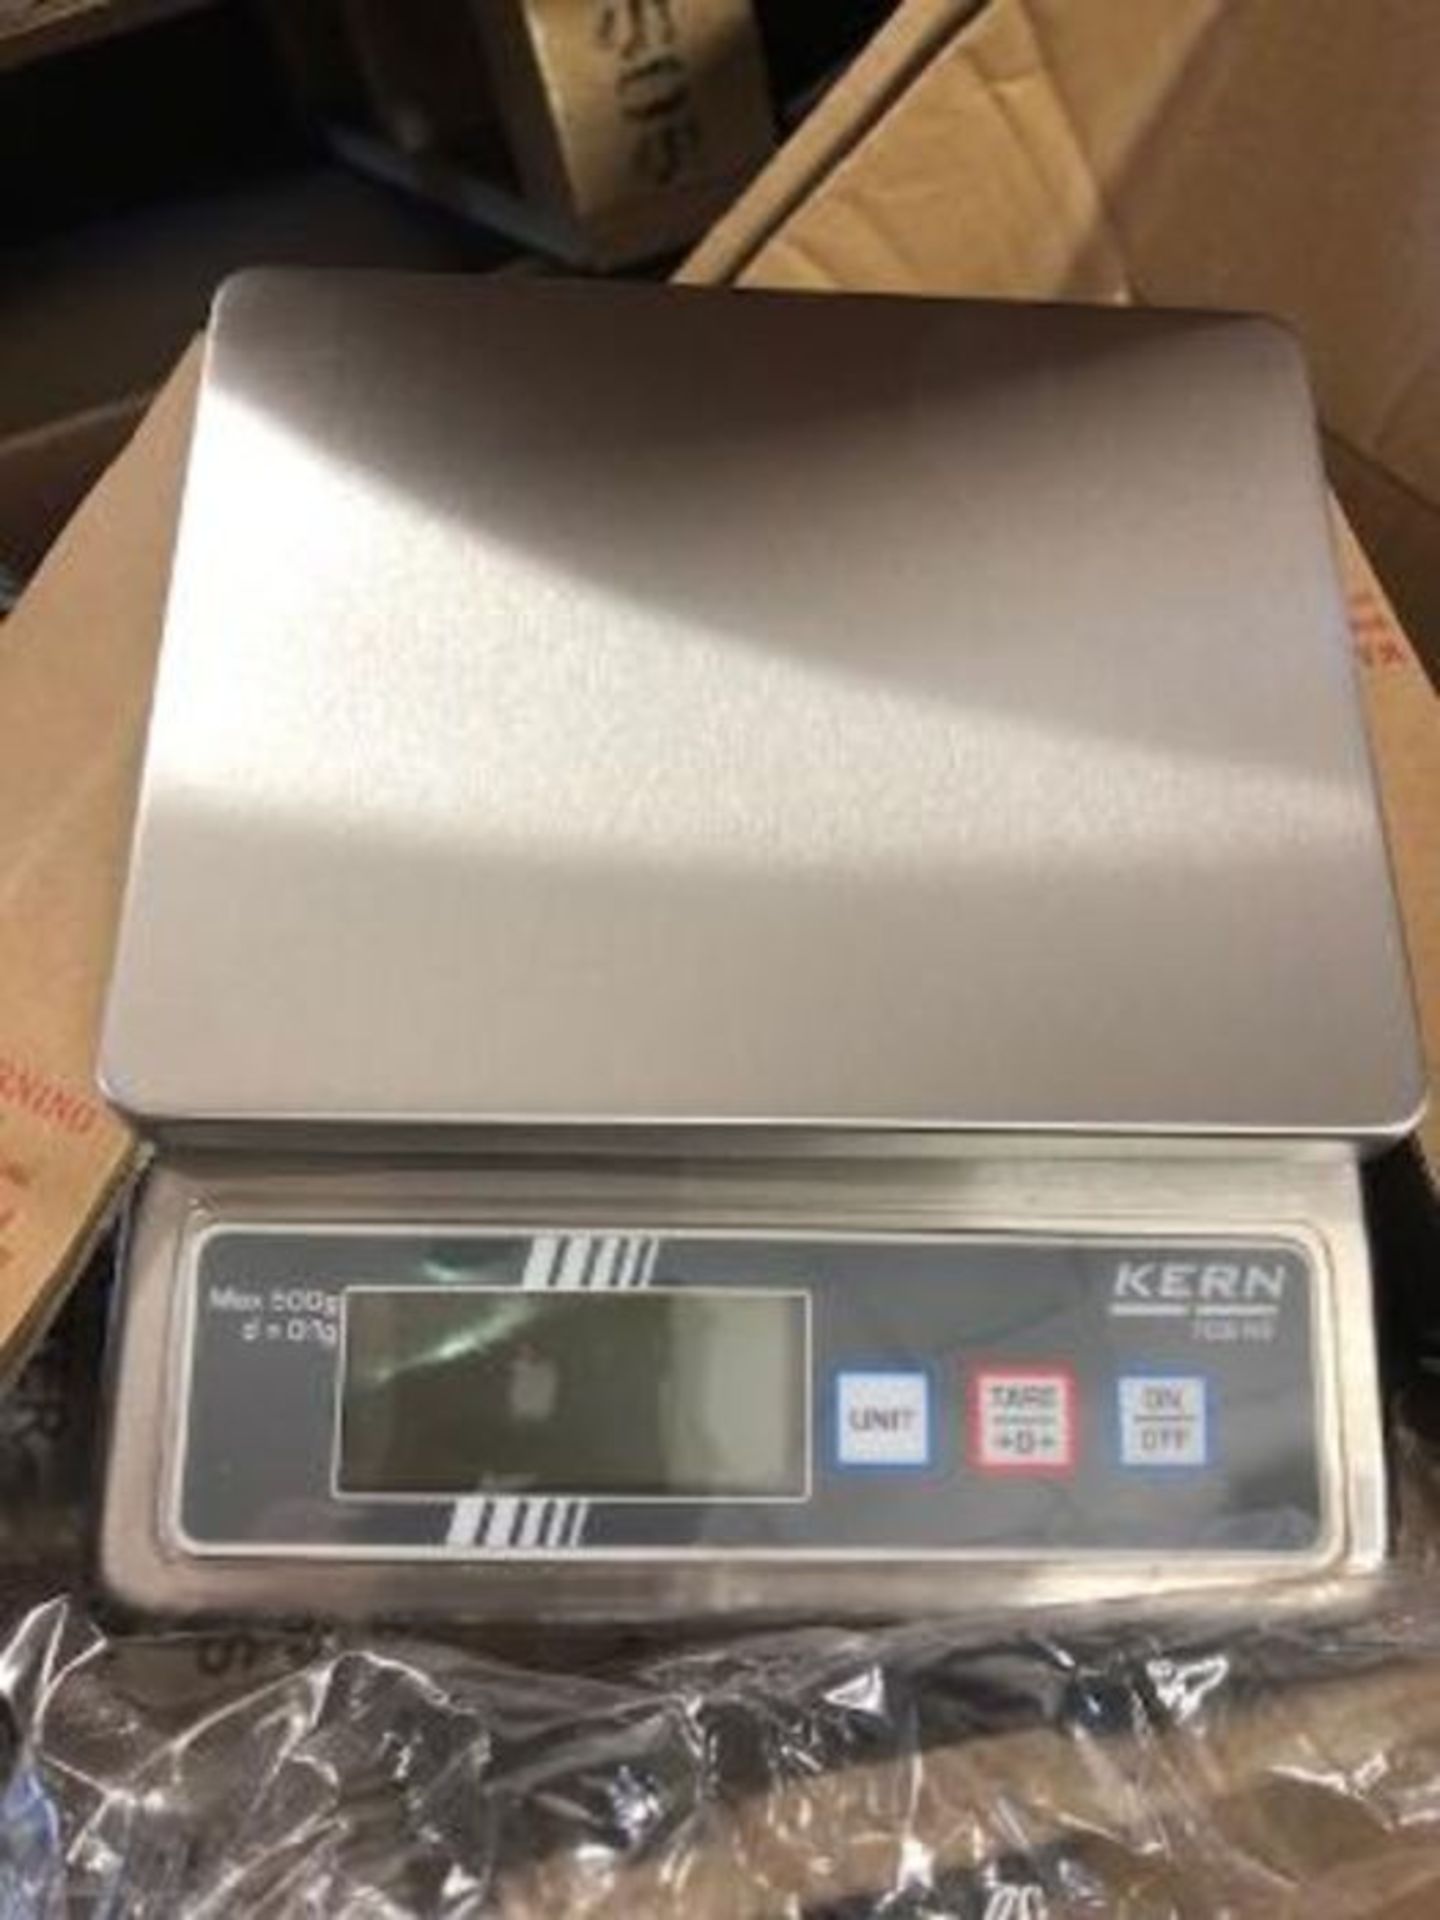 Kern Weighing Scale, 500g Weight Capacity FOB 0.5K-4NS -585 - RS1805324